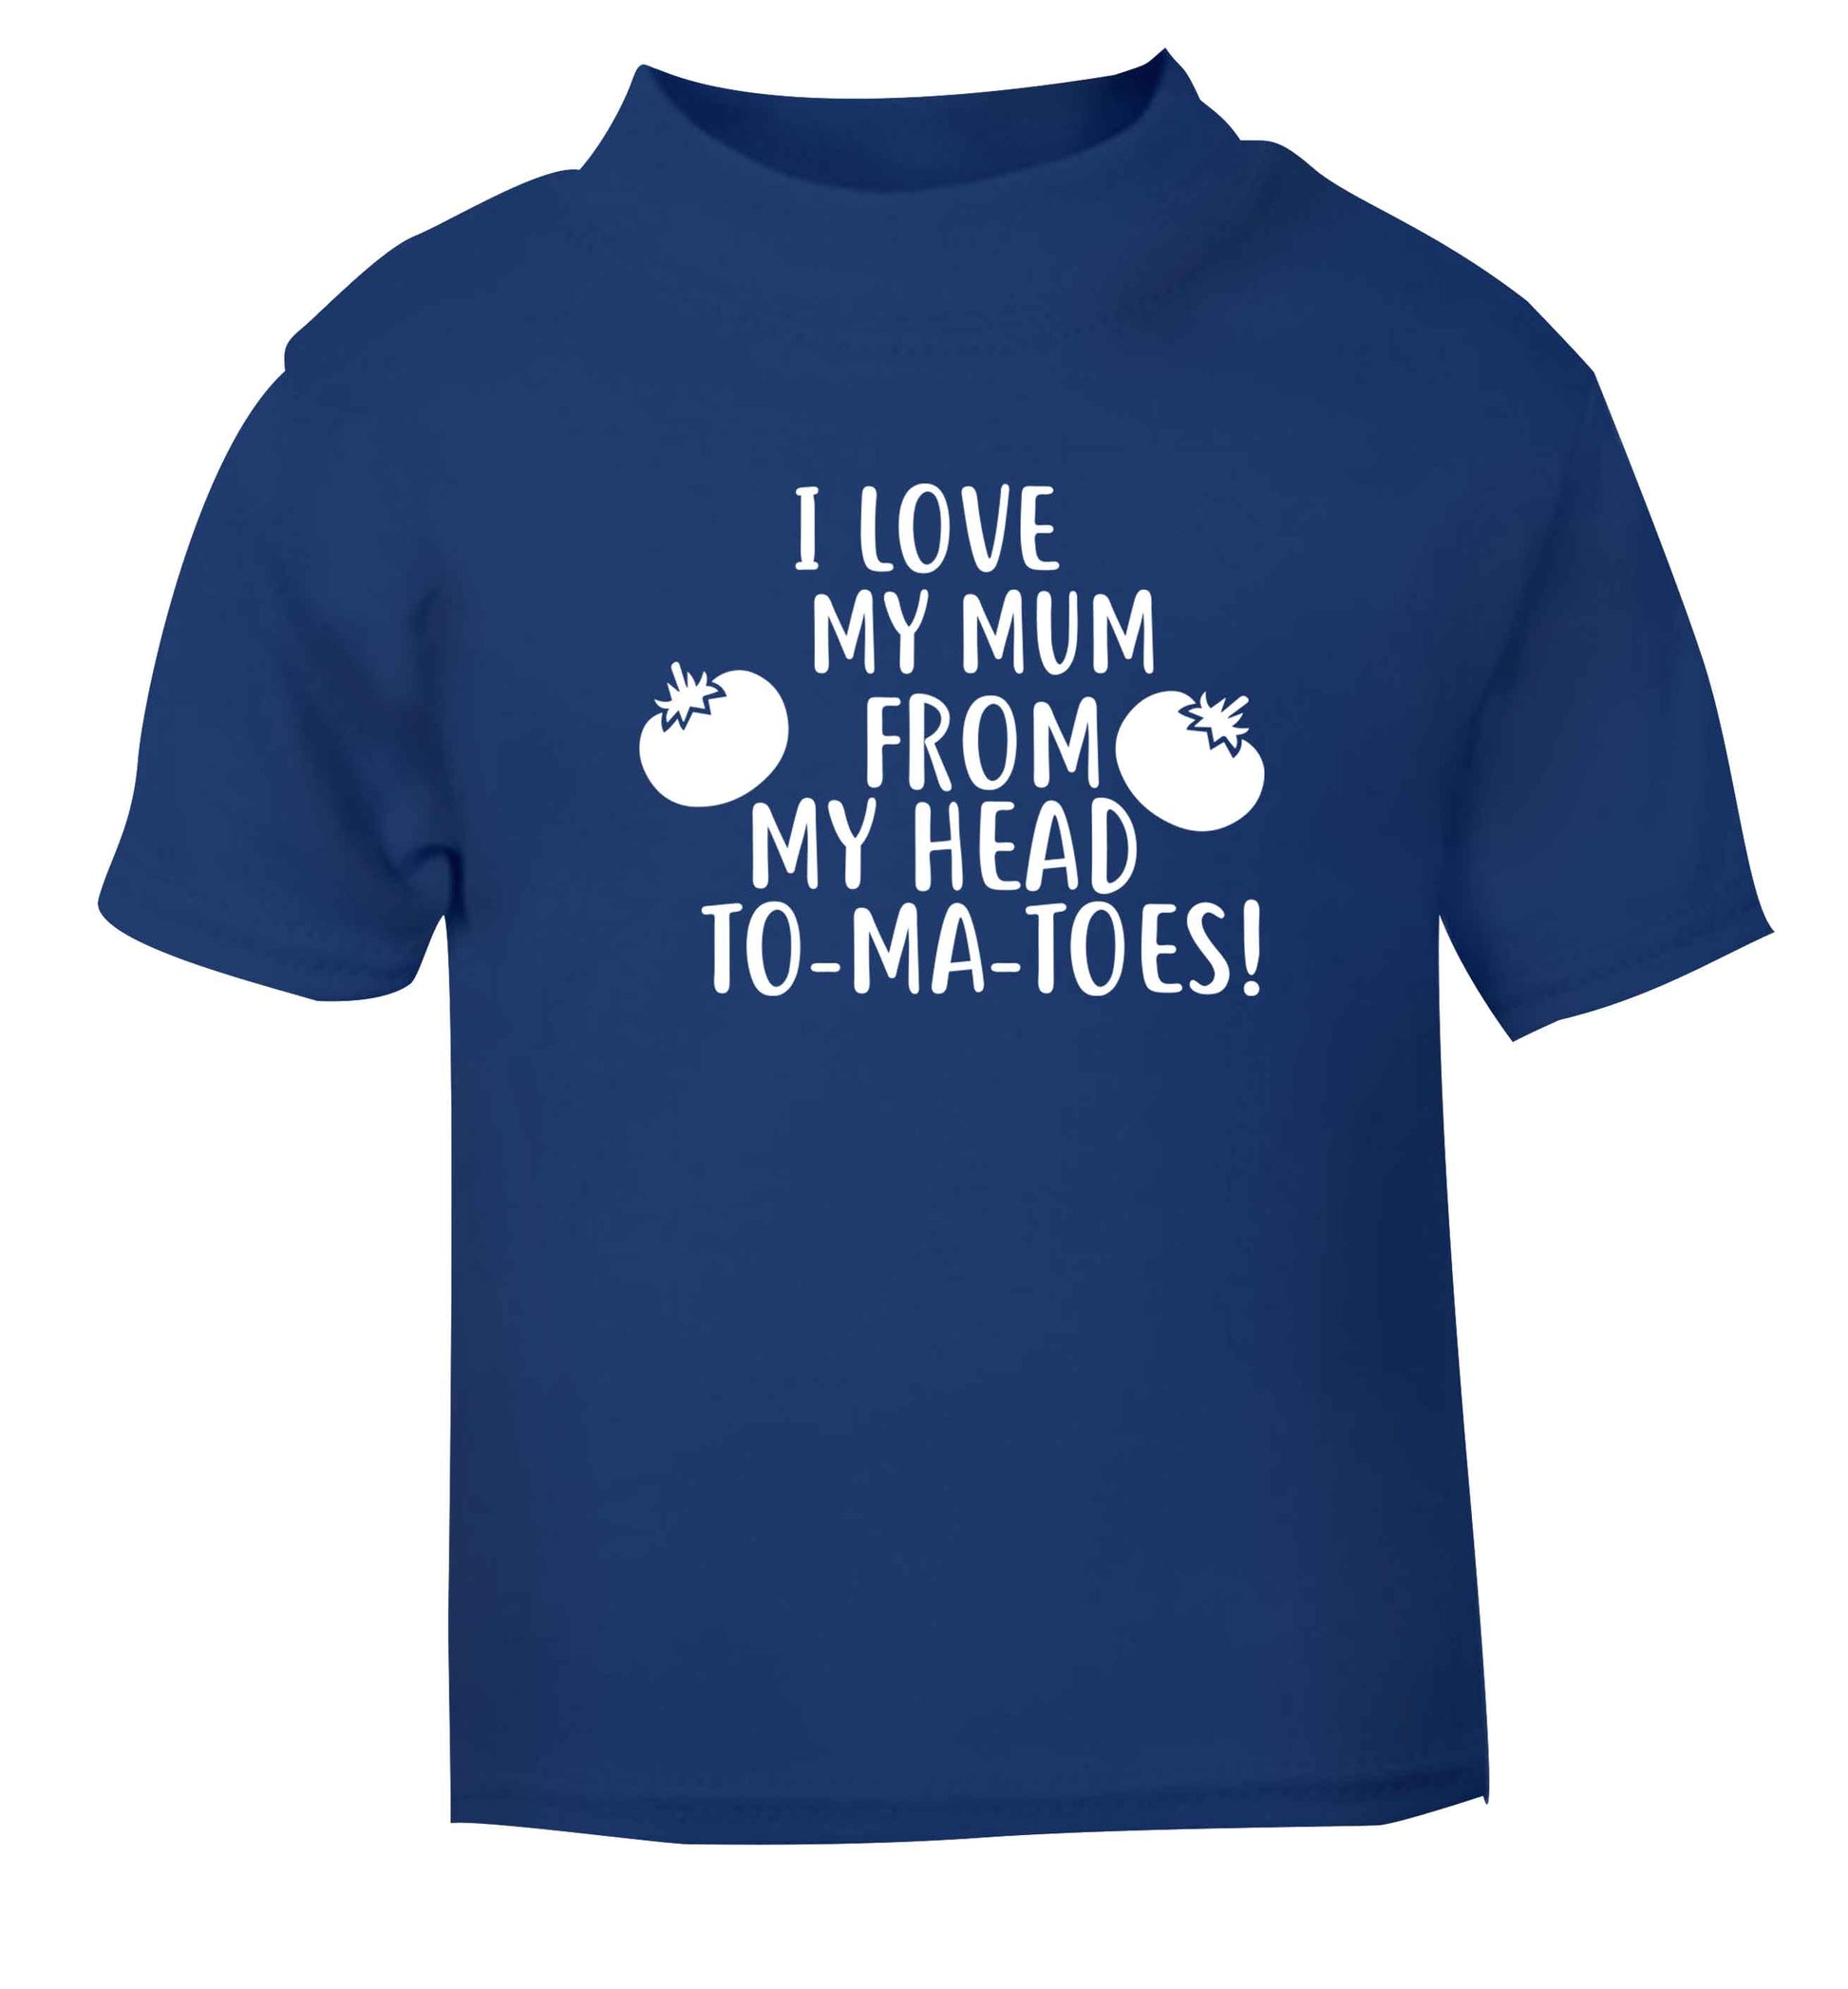 I love my mum from my head to-my-toes! blue baby toddler Tshirt 2 Years